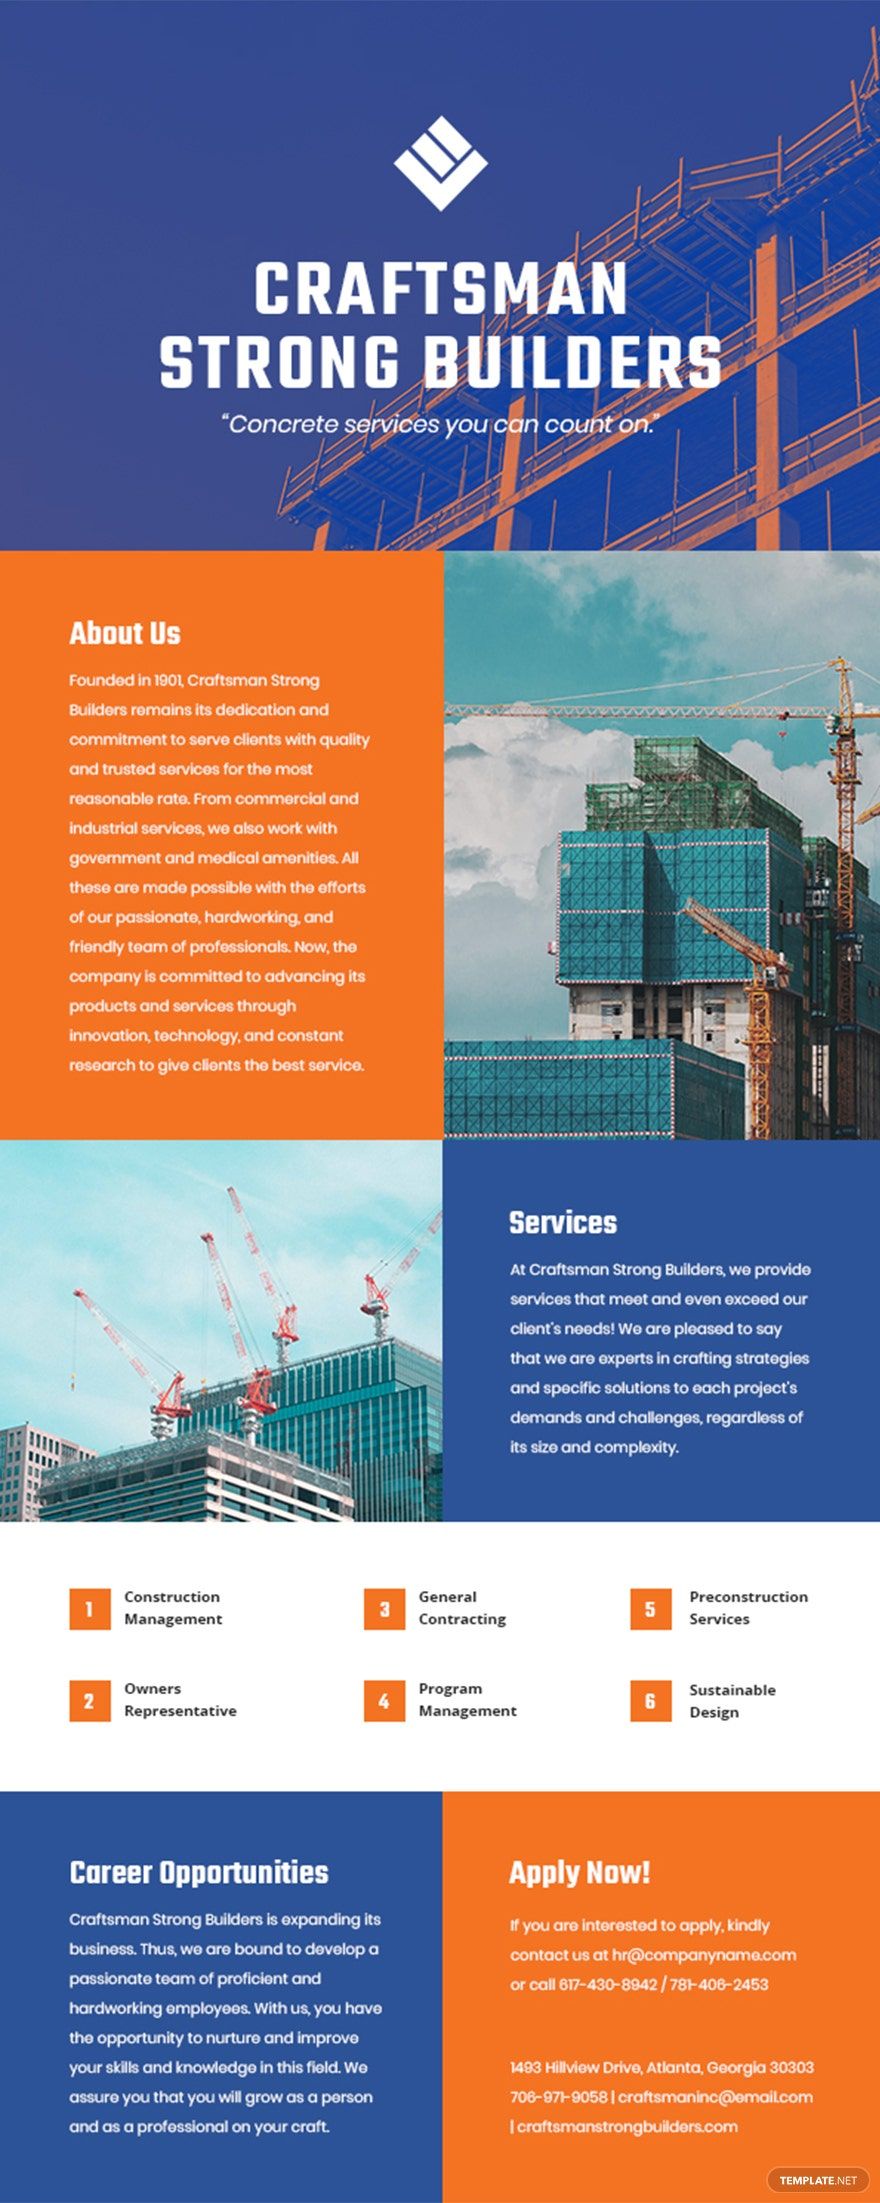 Free Construction Company Newsletter Template in PSD, Outlook, HTML5